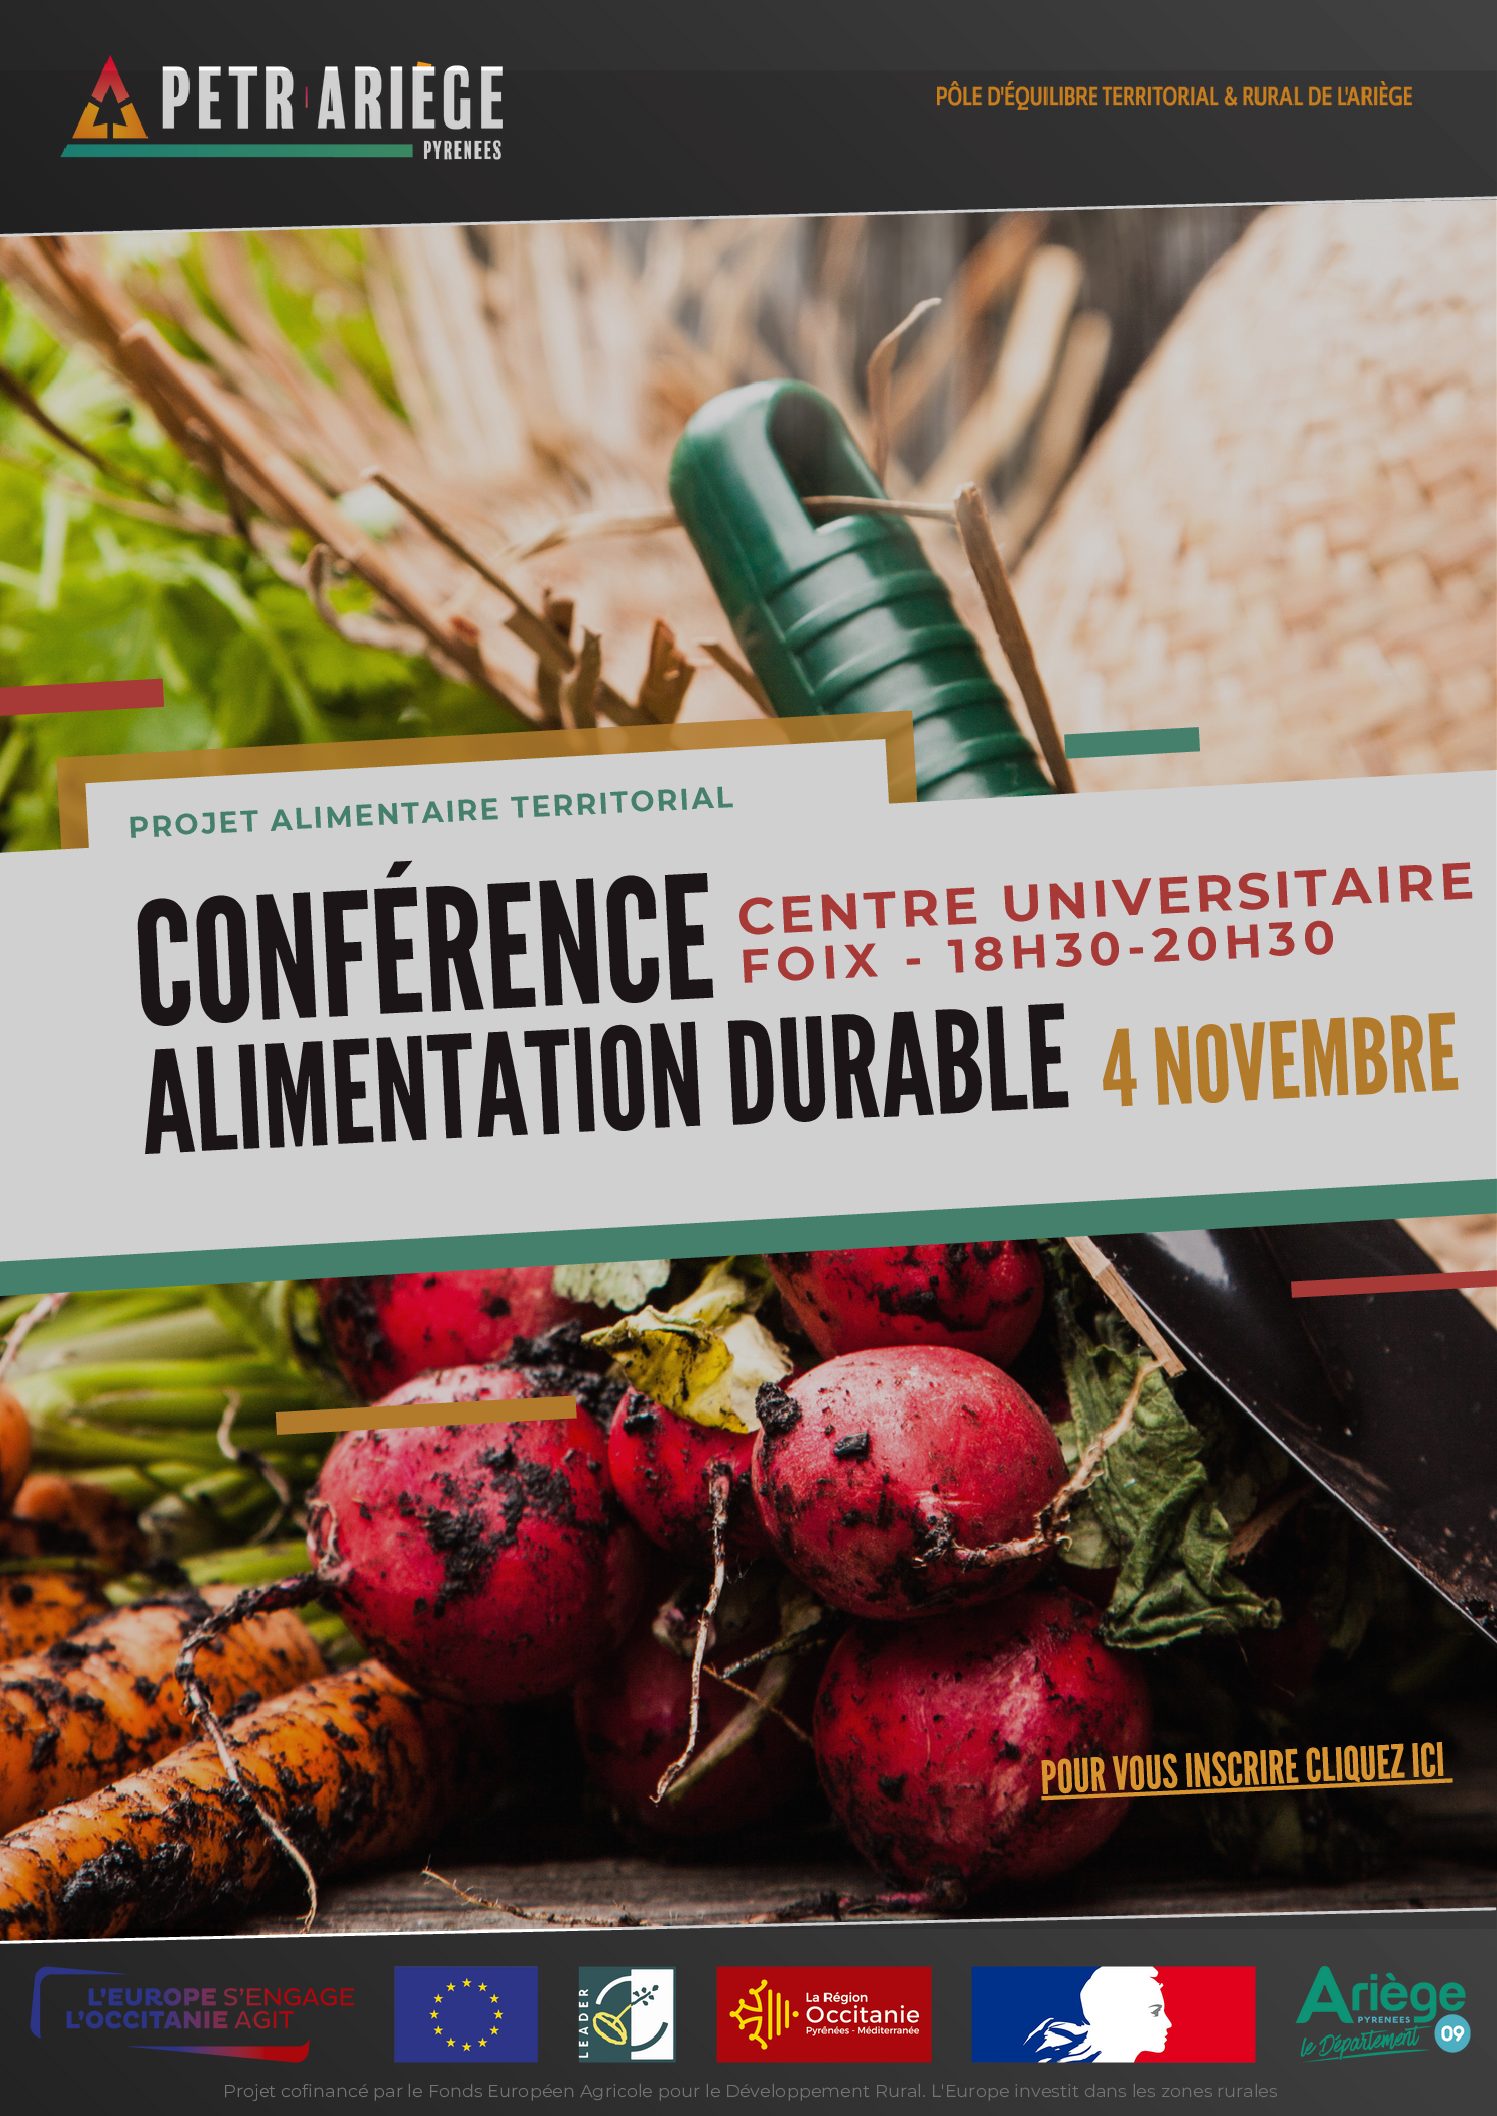 You are currently viewing Participez activement au Projet Alimentaire Territorial